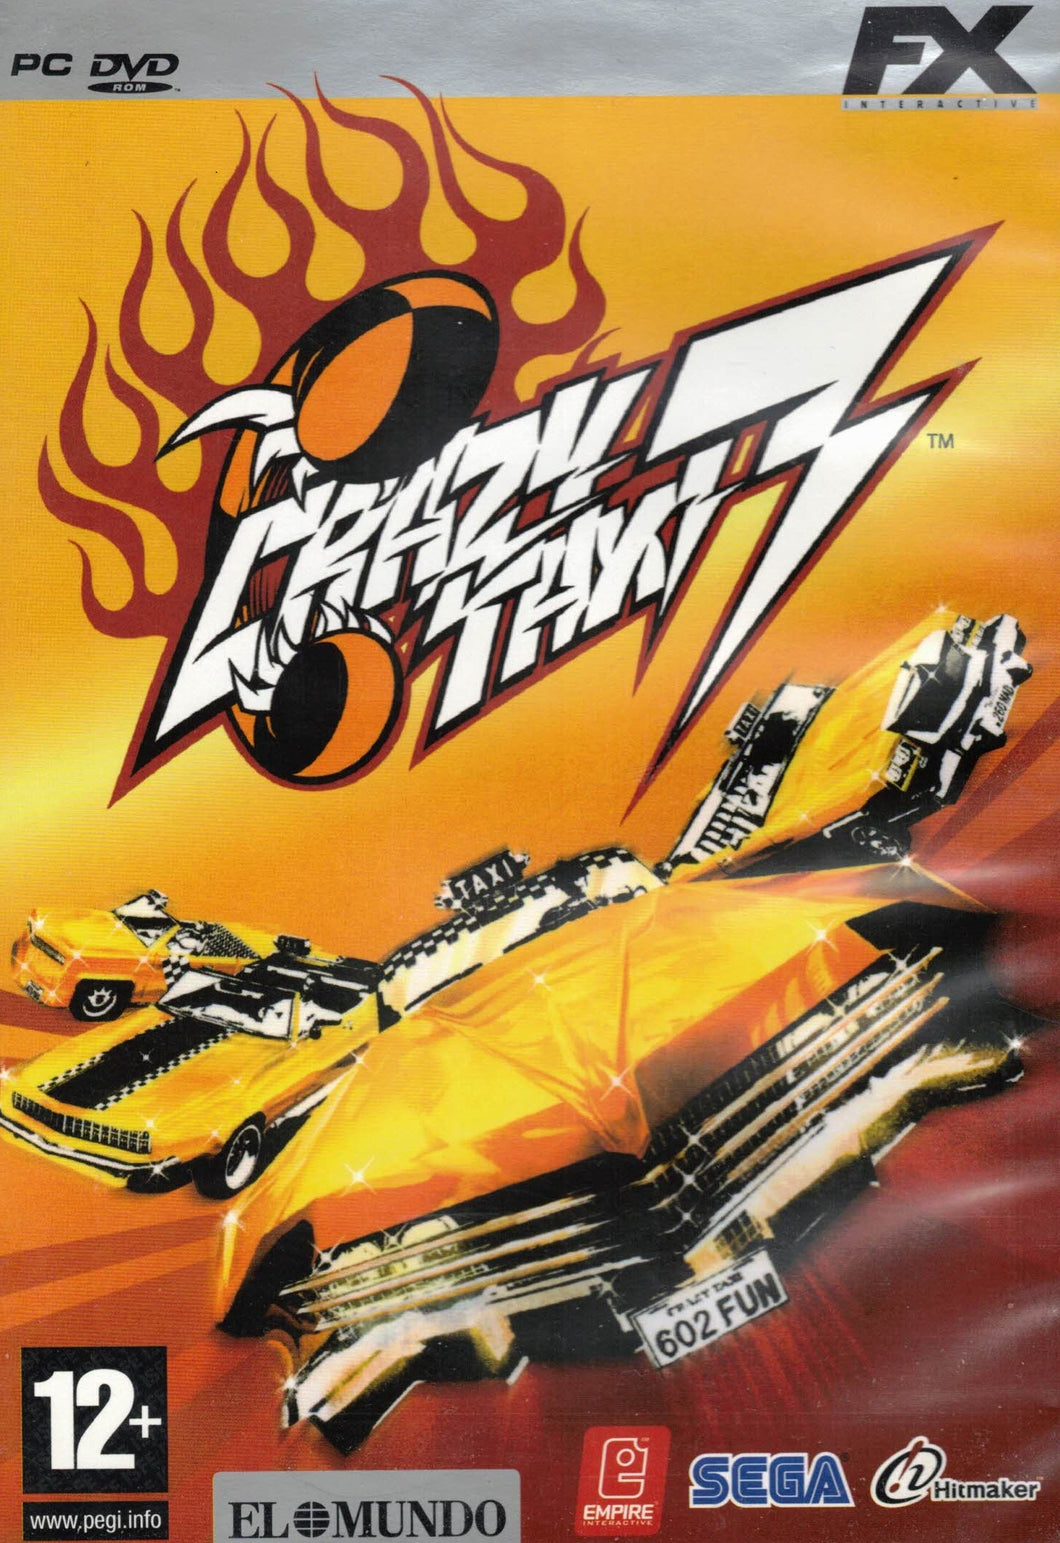 CRAZY TAXI 3 (PC-DVD) FX INTERACTIVE (second hand very good)